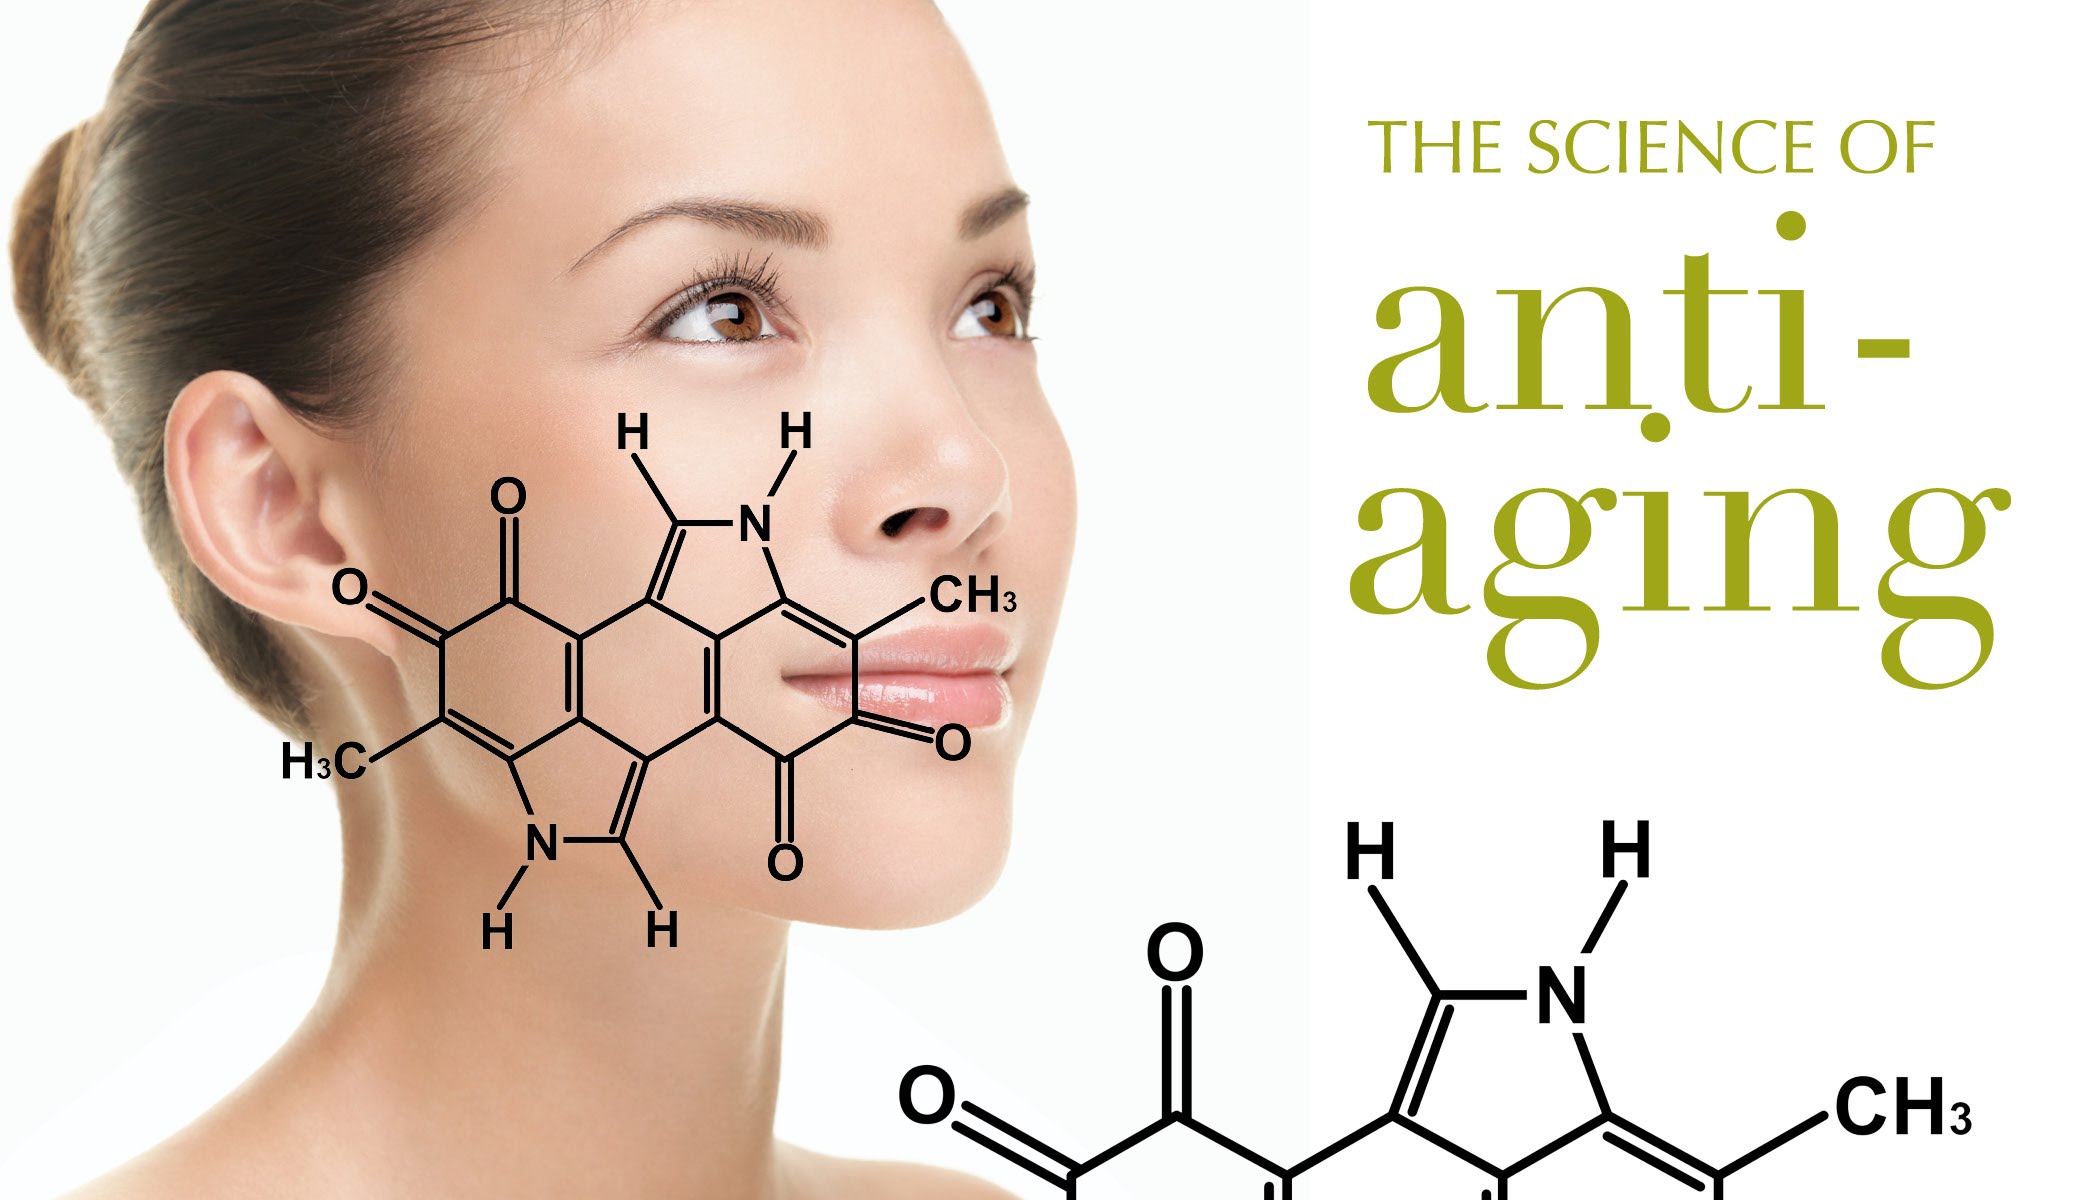 NAD - a leader in the field of anti-aging